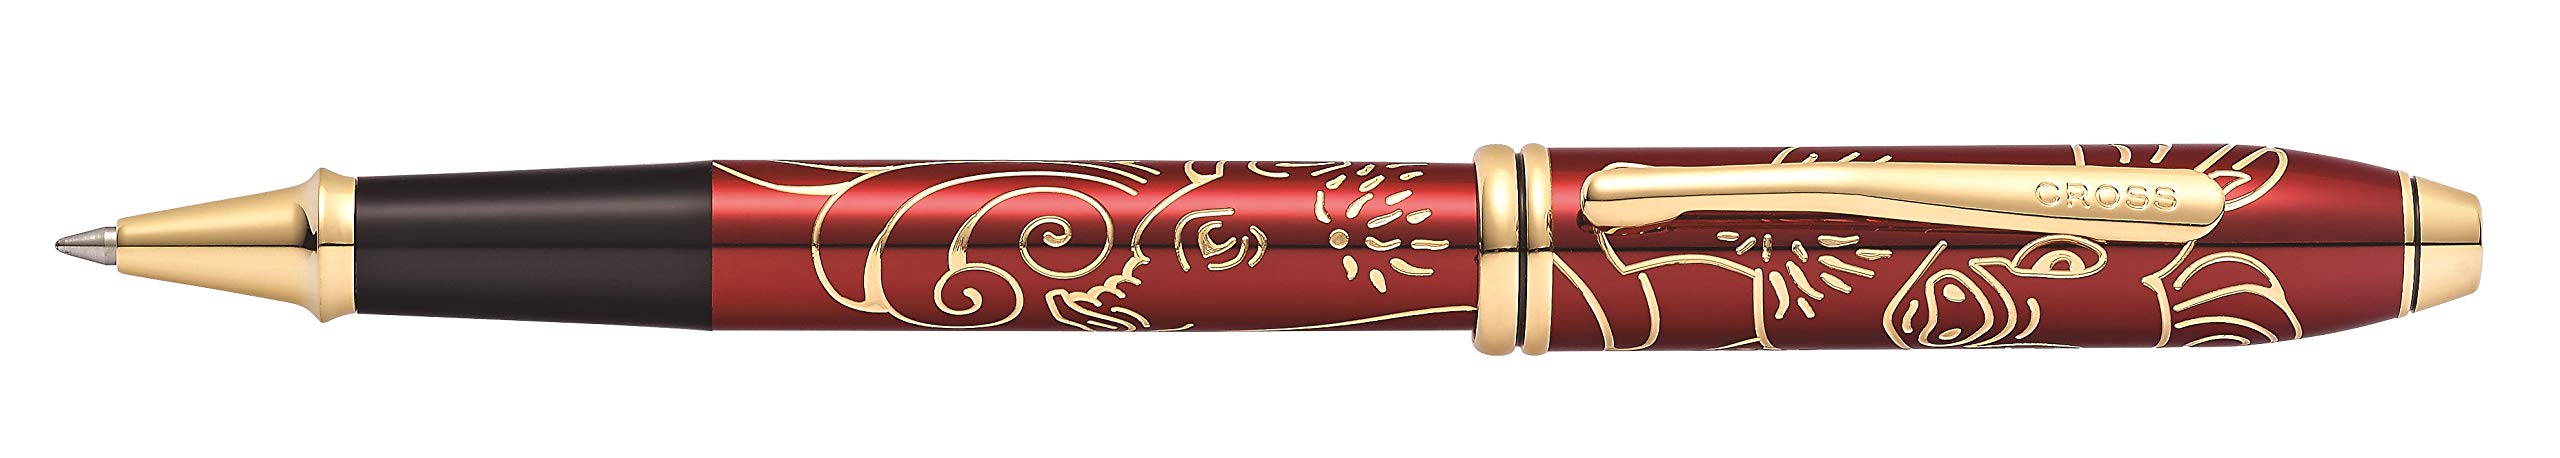 Cross 2019 Cross Townsend Zodiac Year of the Pig Selectip Rollerball Pen with 23KT Gold-Plated Appointments